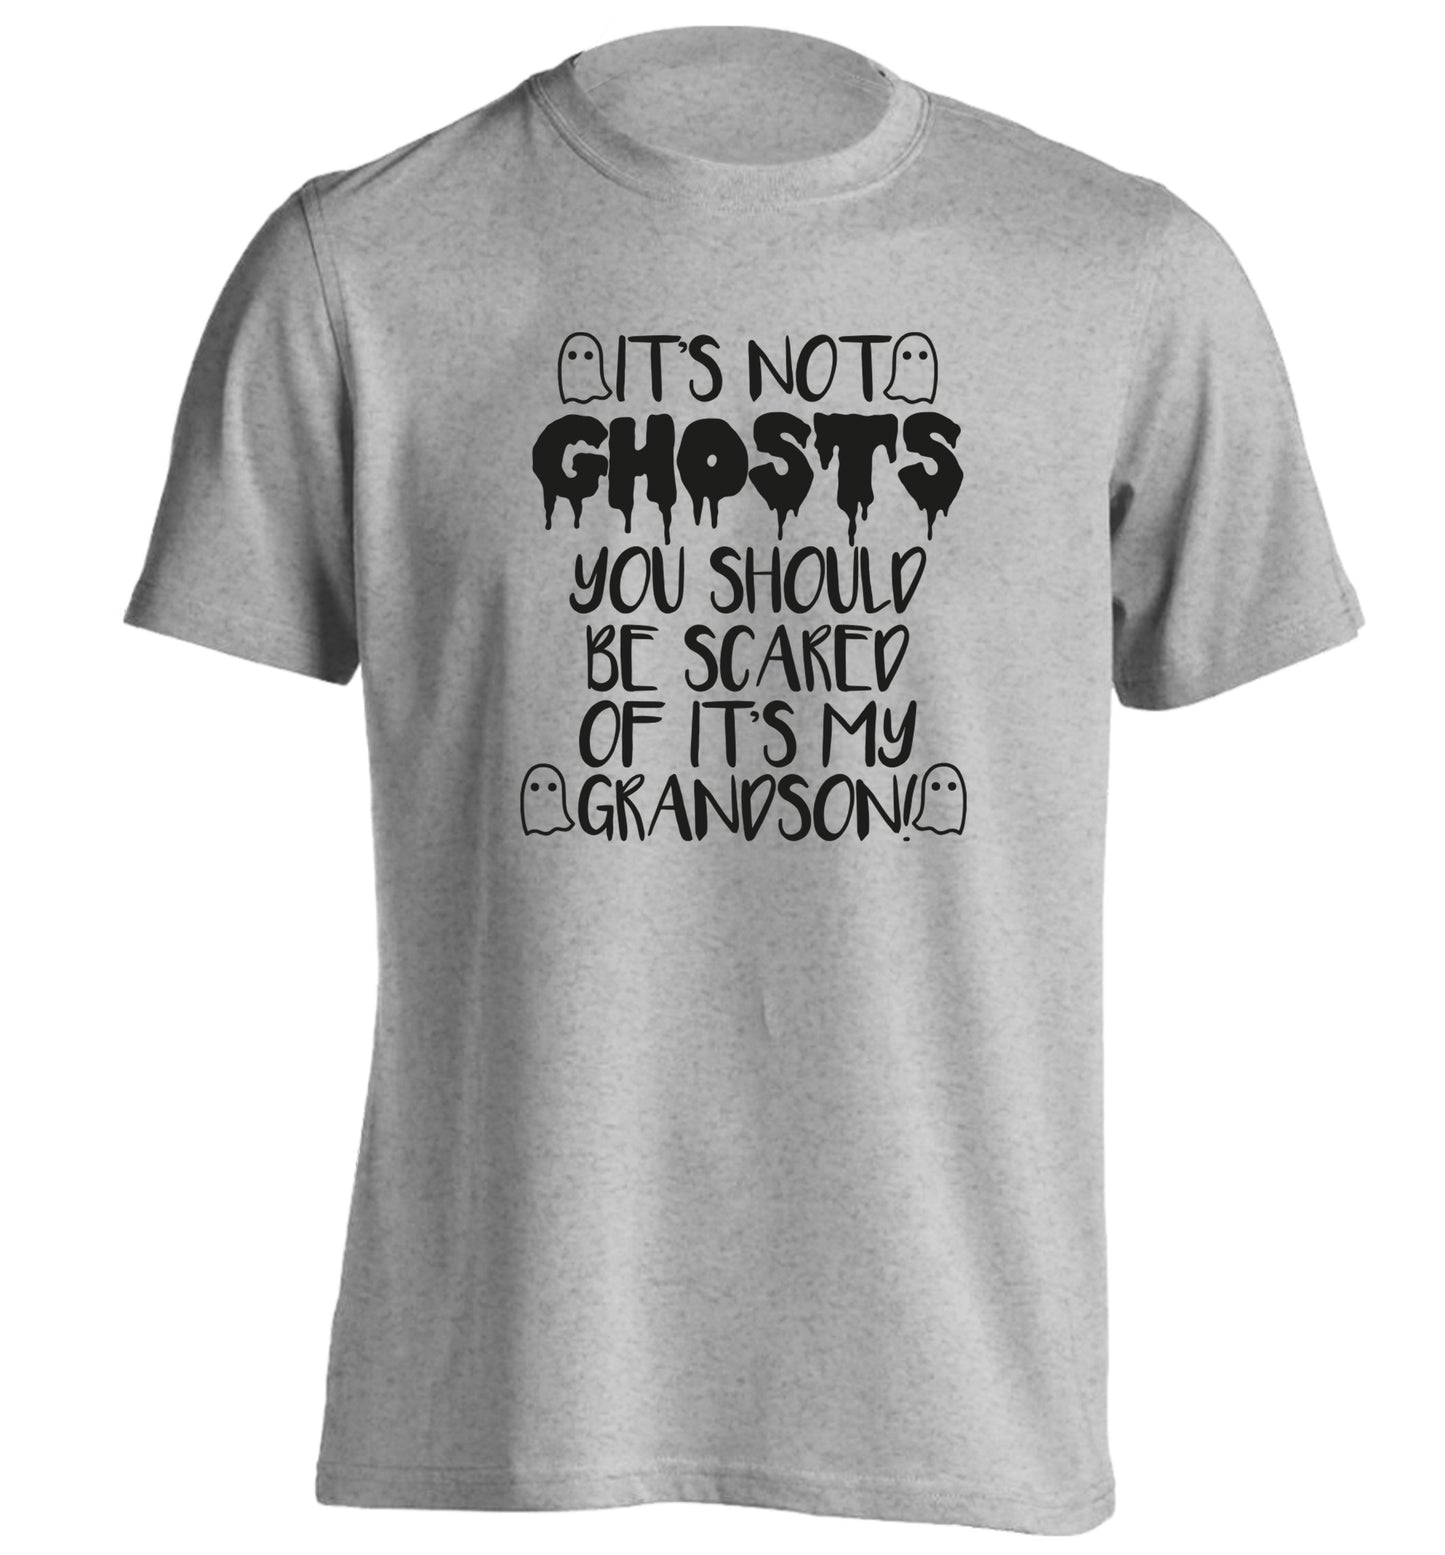 It's not ghosts you should be scared of it's my grandson! adults unisex grey Tshirt 2XL